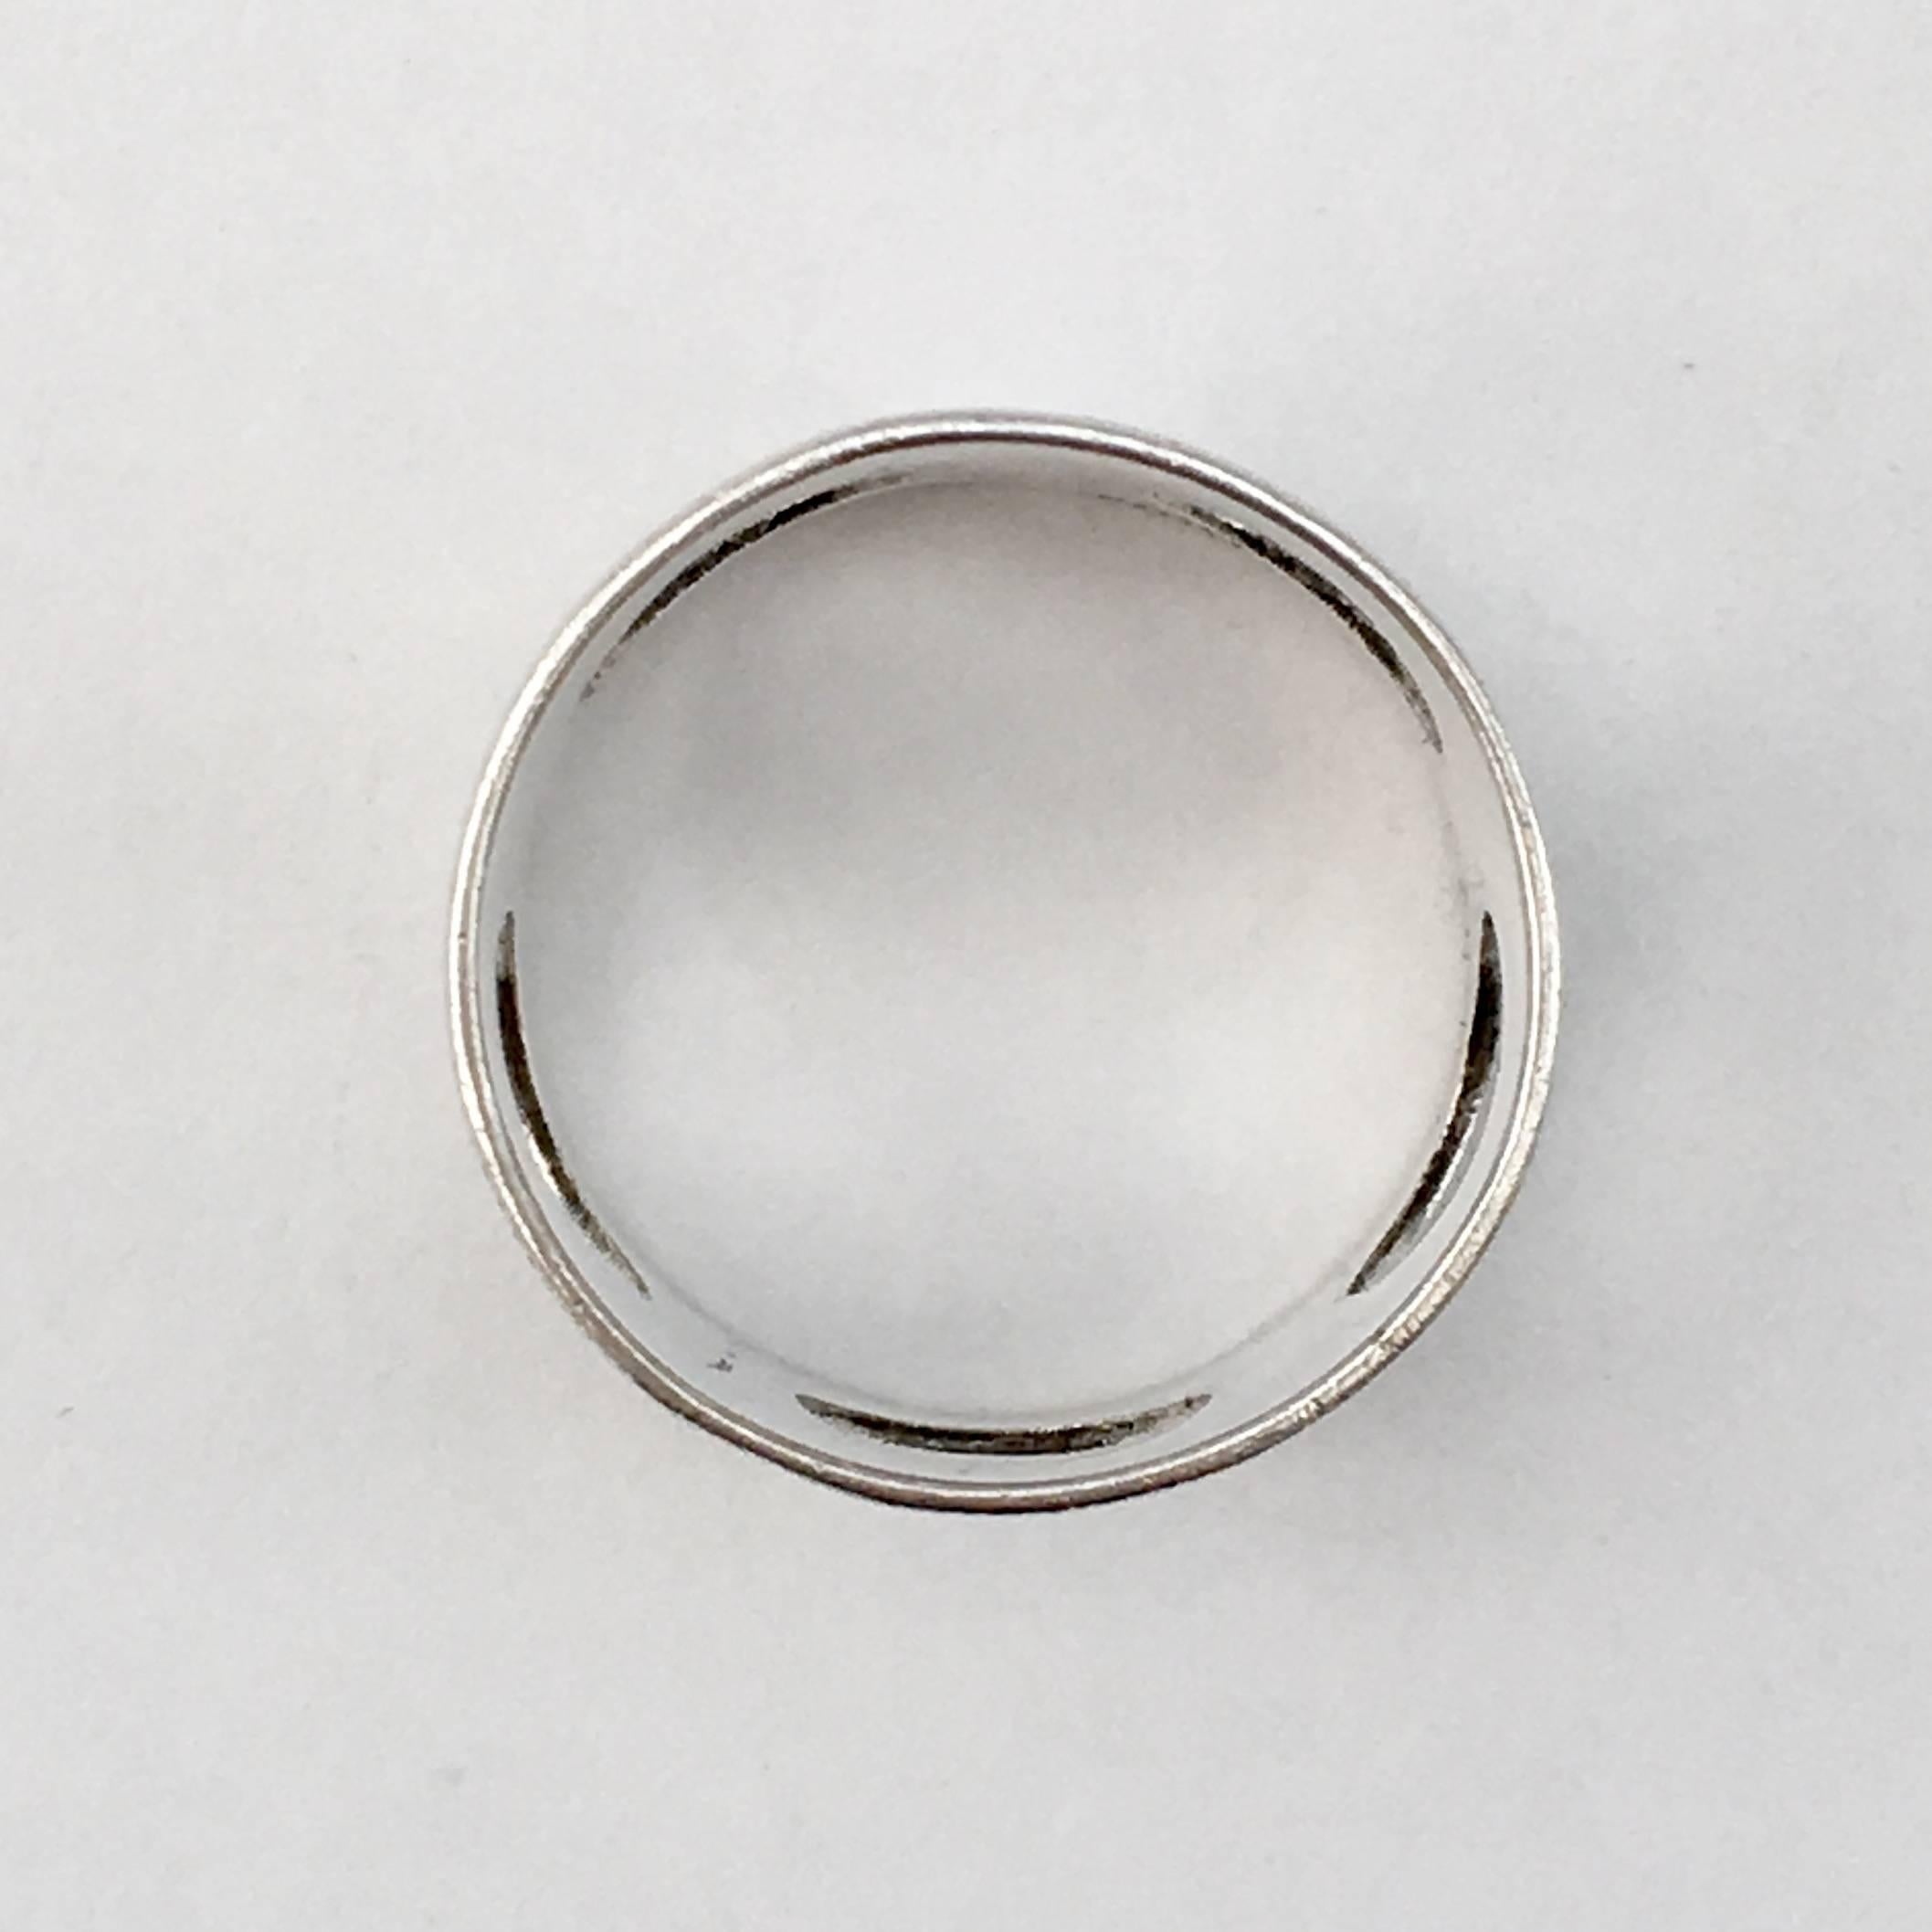 Engraved Ring Circular Coin Cutouts Wide Band Siam Silver Vintage Jewelry 3